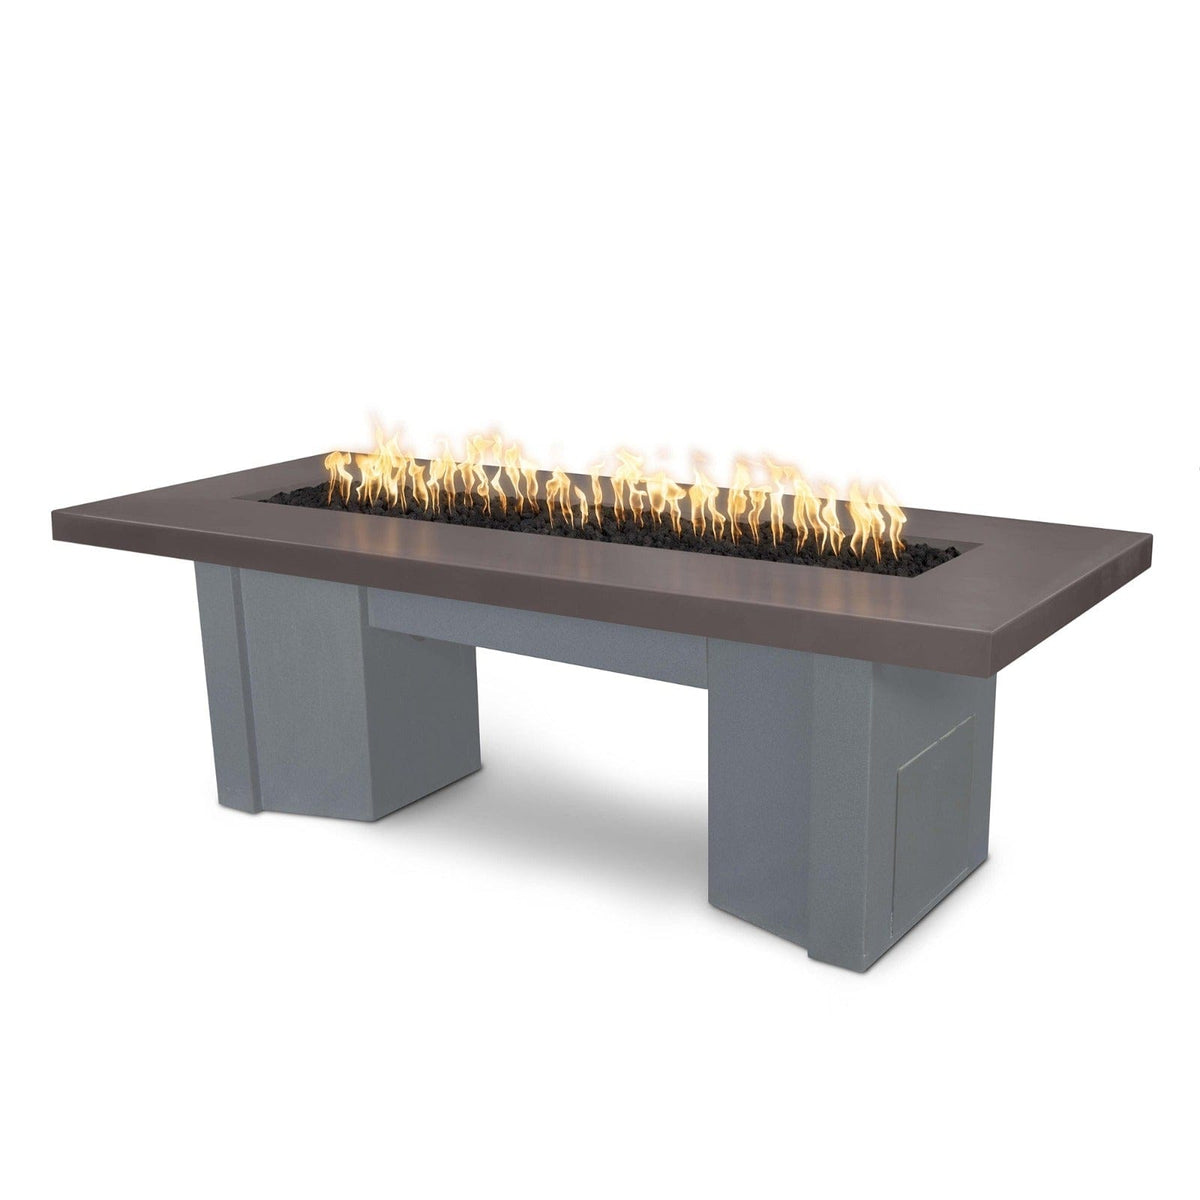 The Outdoor Plus Fire Features Chestnut (-CST) / Gray Powder Coated Steel (-GRY) The Outdoor Plus 60&quot; Alameda Fire Table Smooth Concrete in Natural Gas - Match Lit with Flame Sense System / OPT-ALMGFRC60FSML-NG